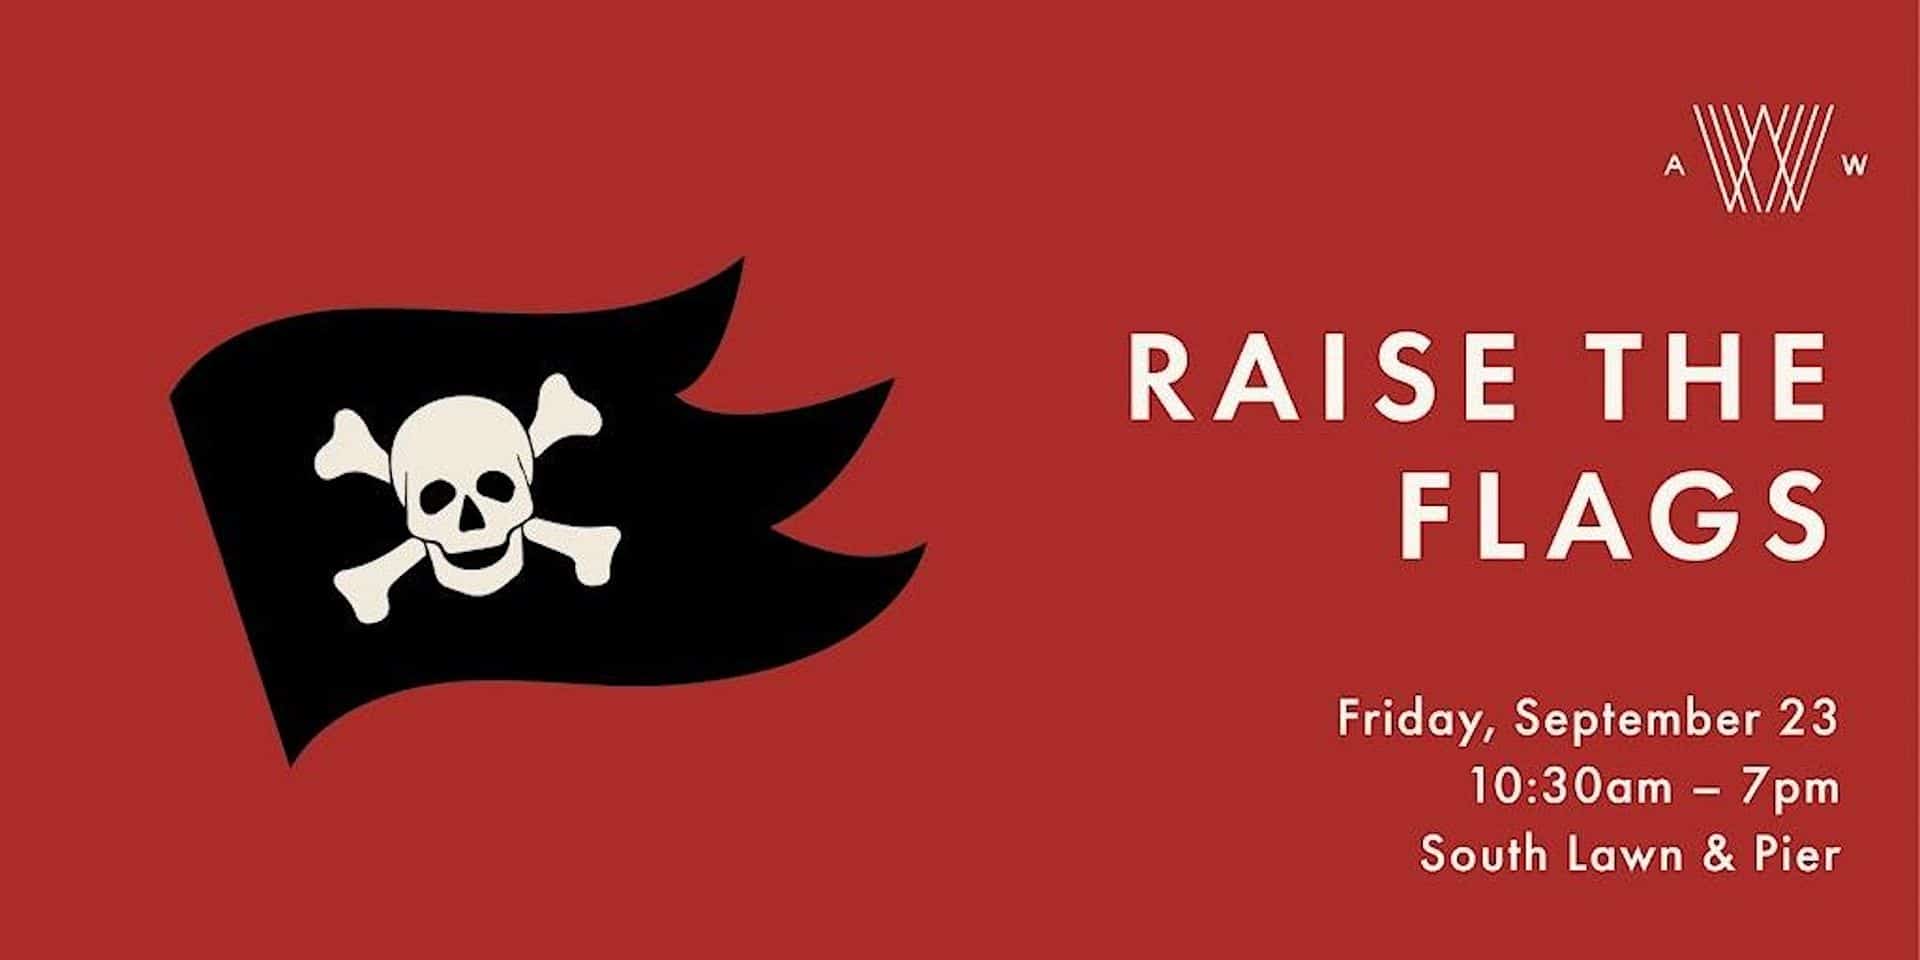 Raise the Flags - Buccaneers at Armature Works